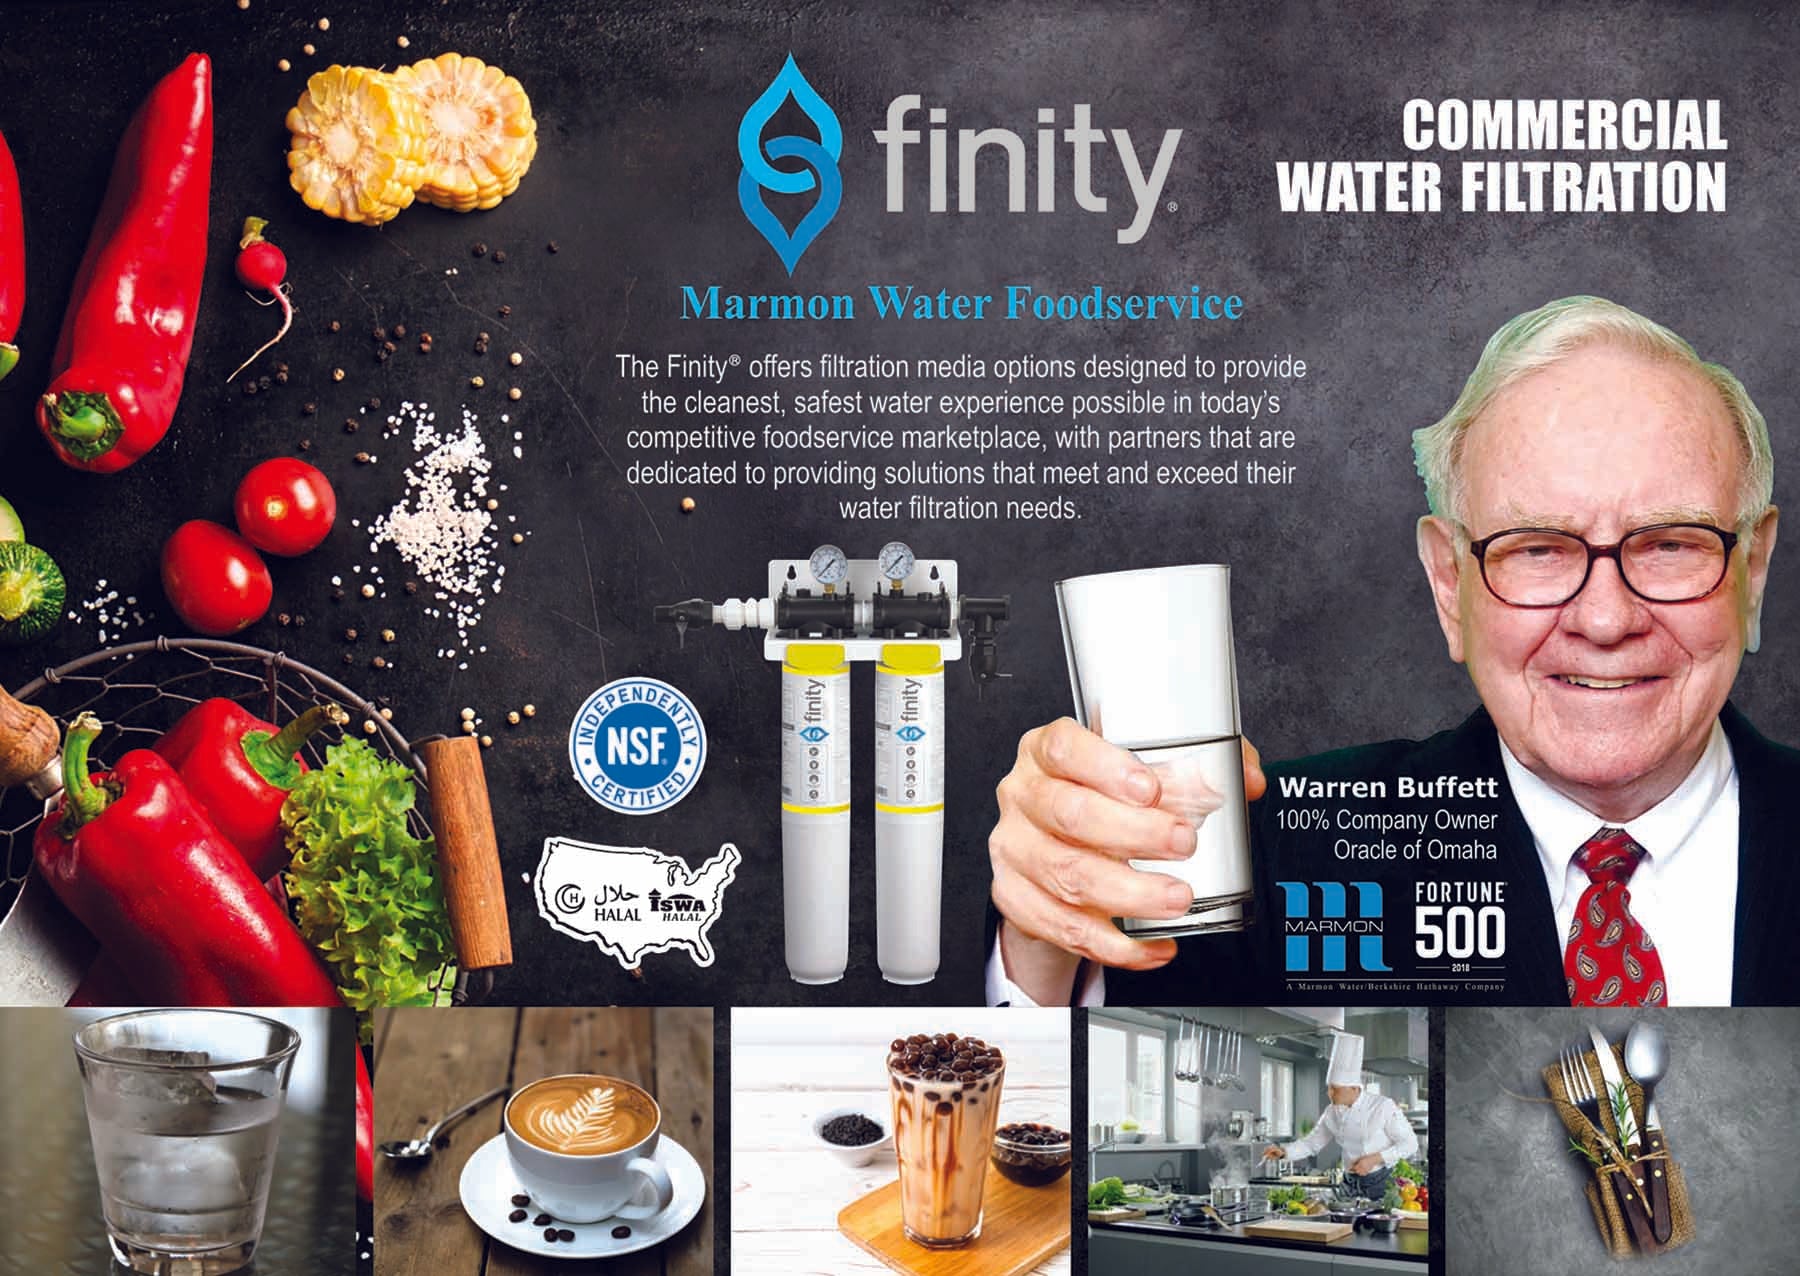 FINITY FOOD SERVICE WATER FILTRATION SYSTEM